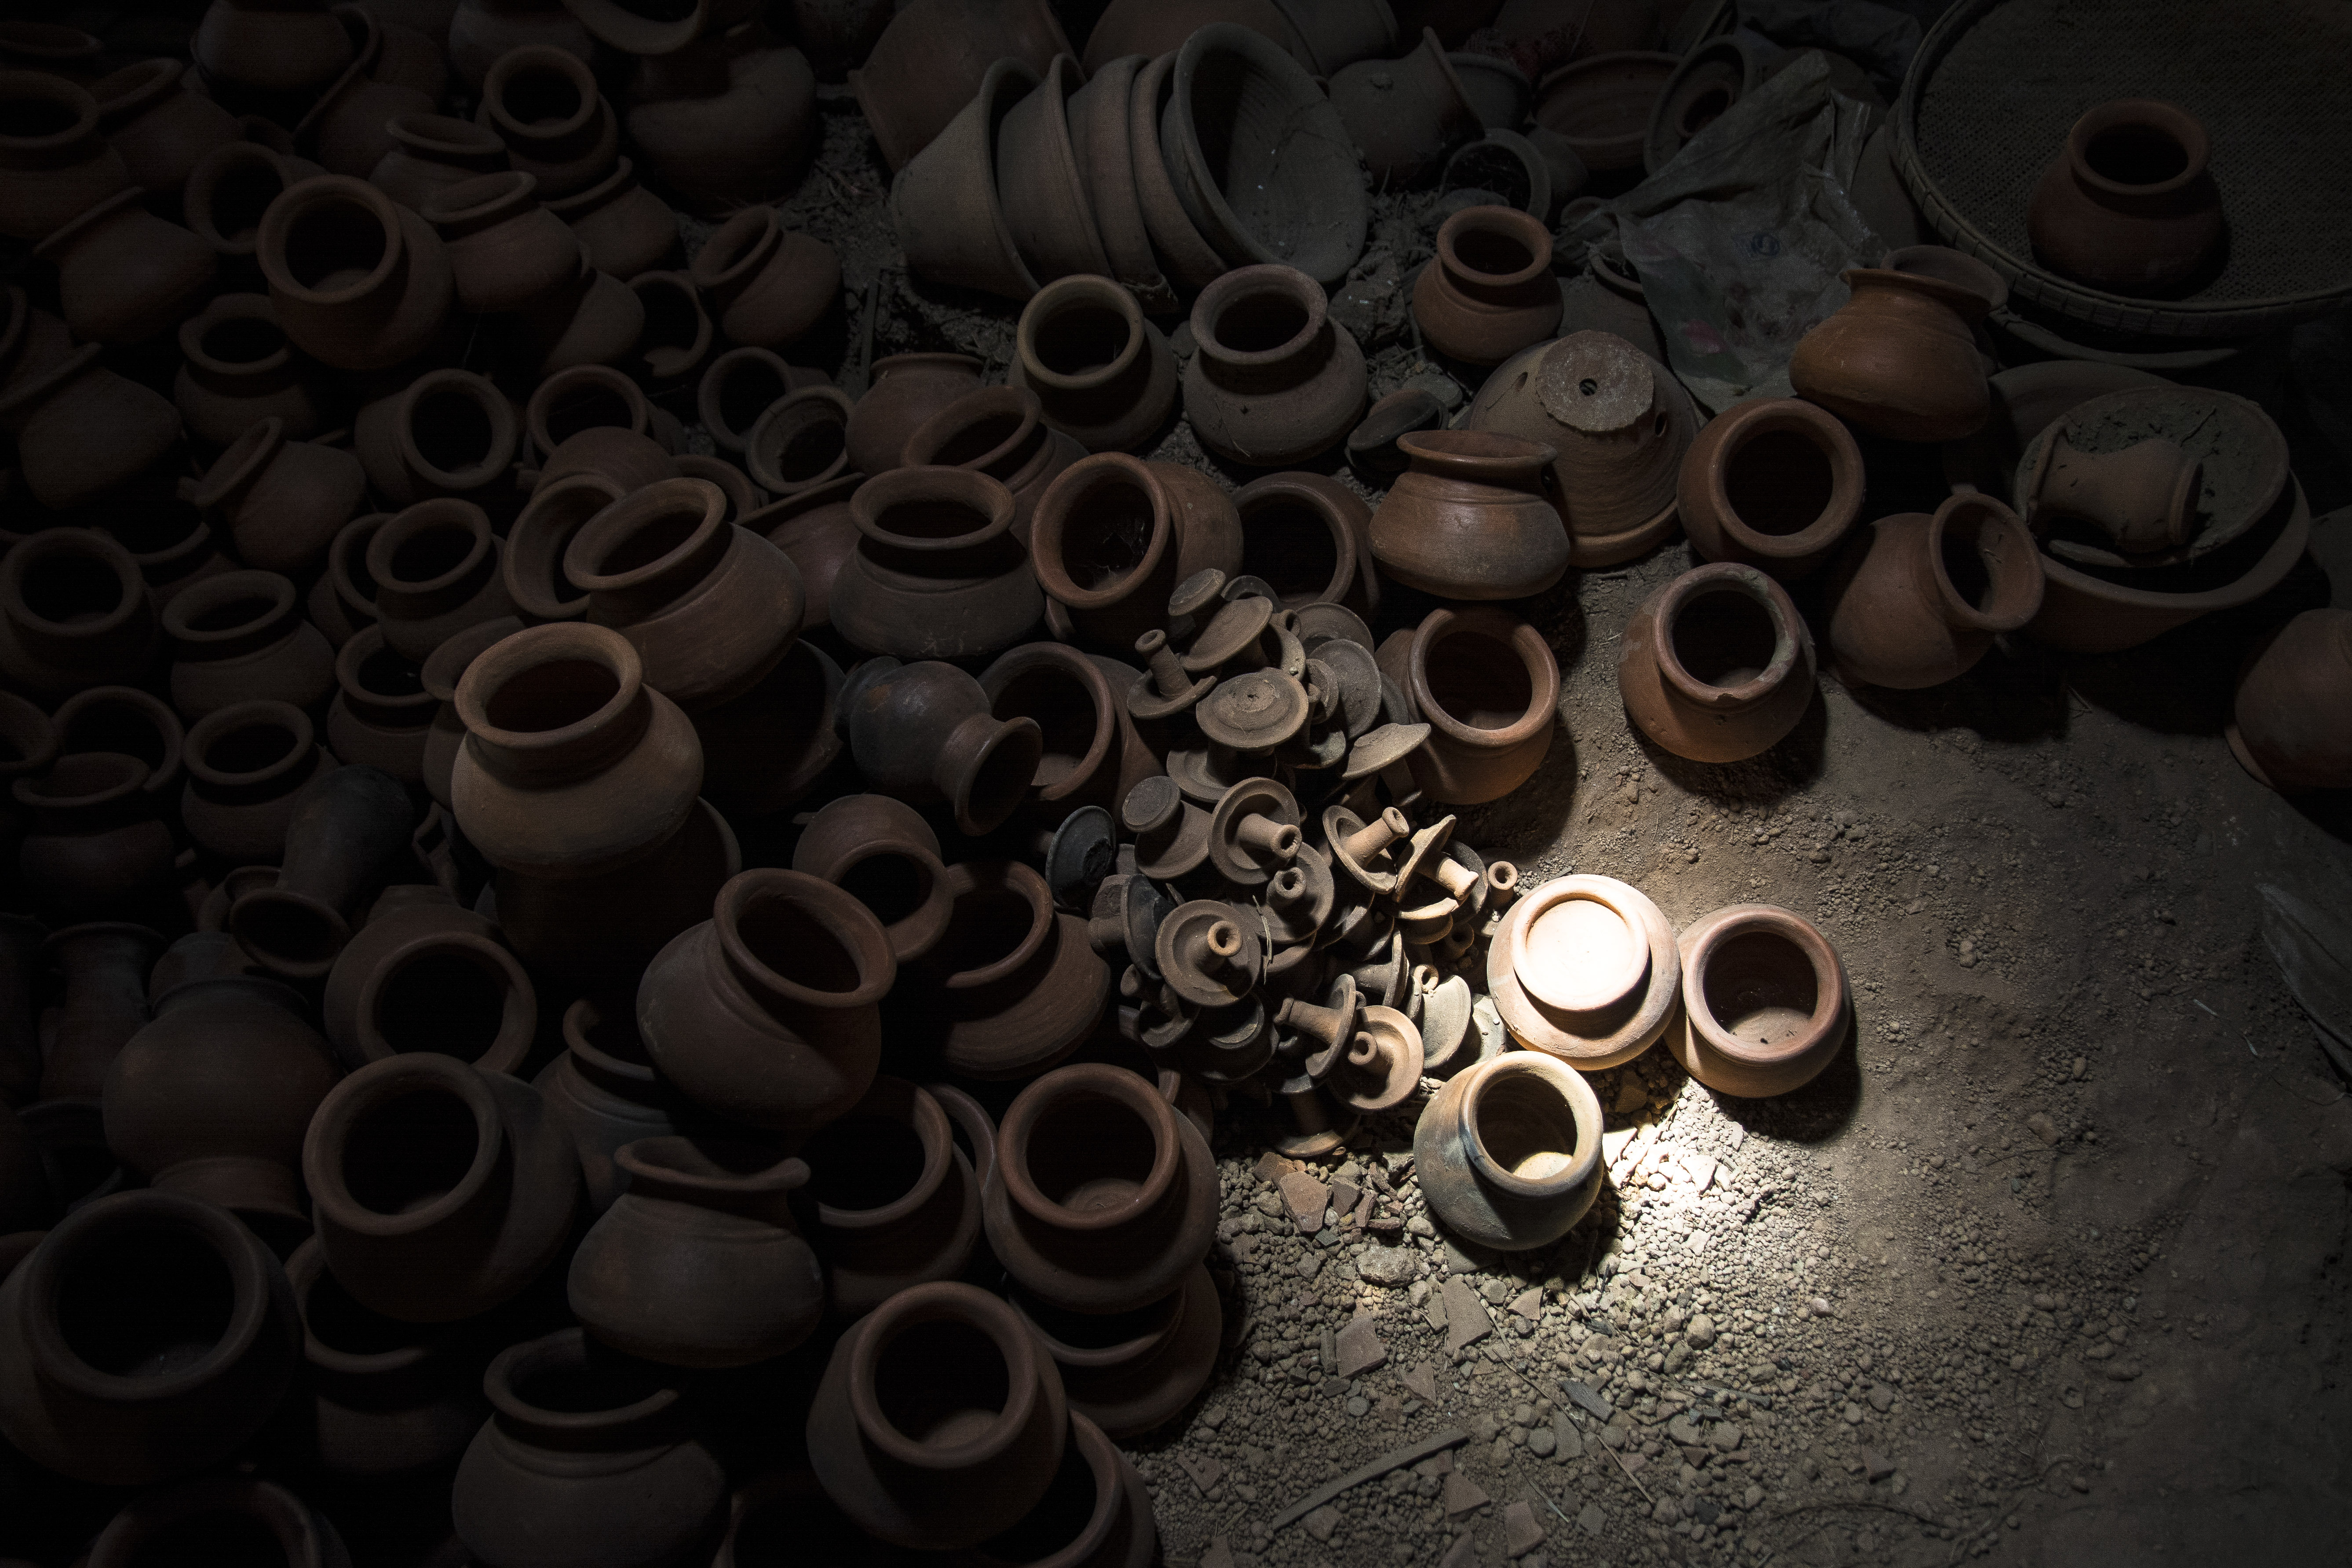 Pile of pottery